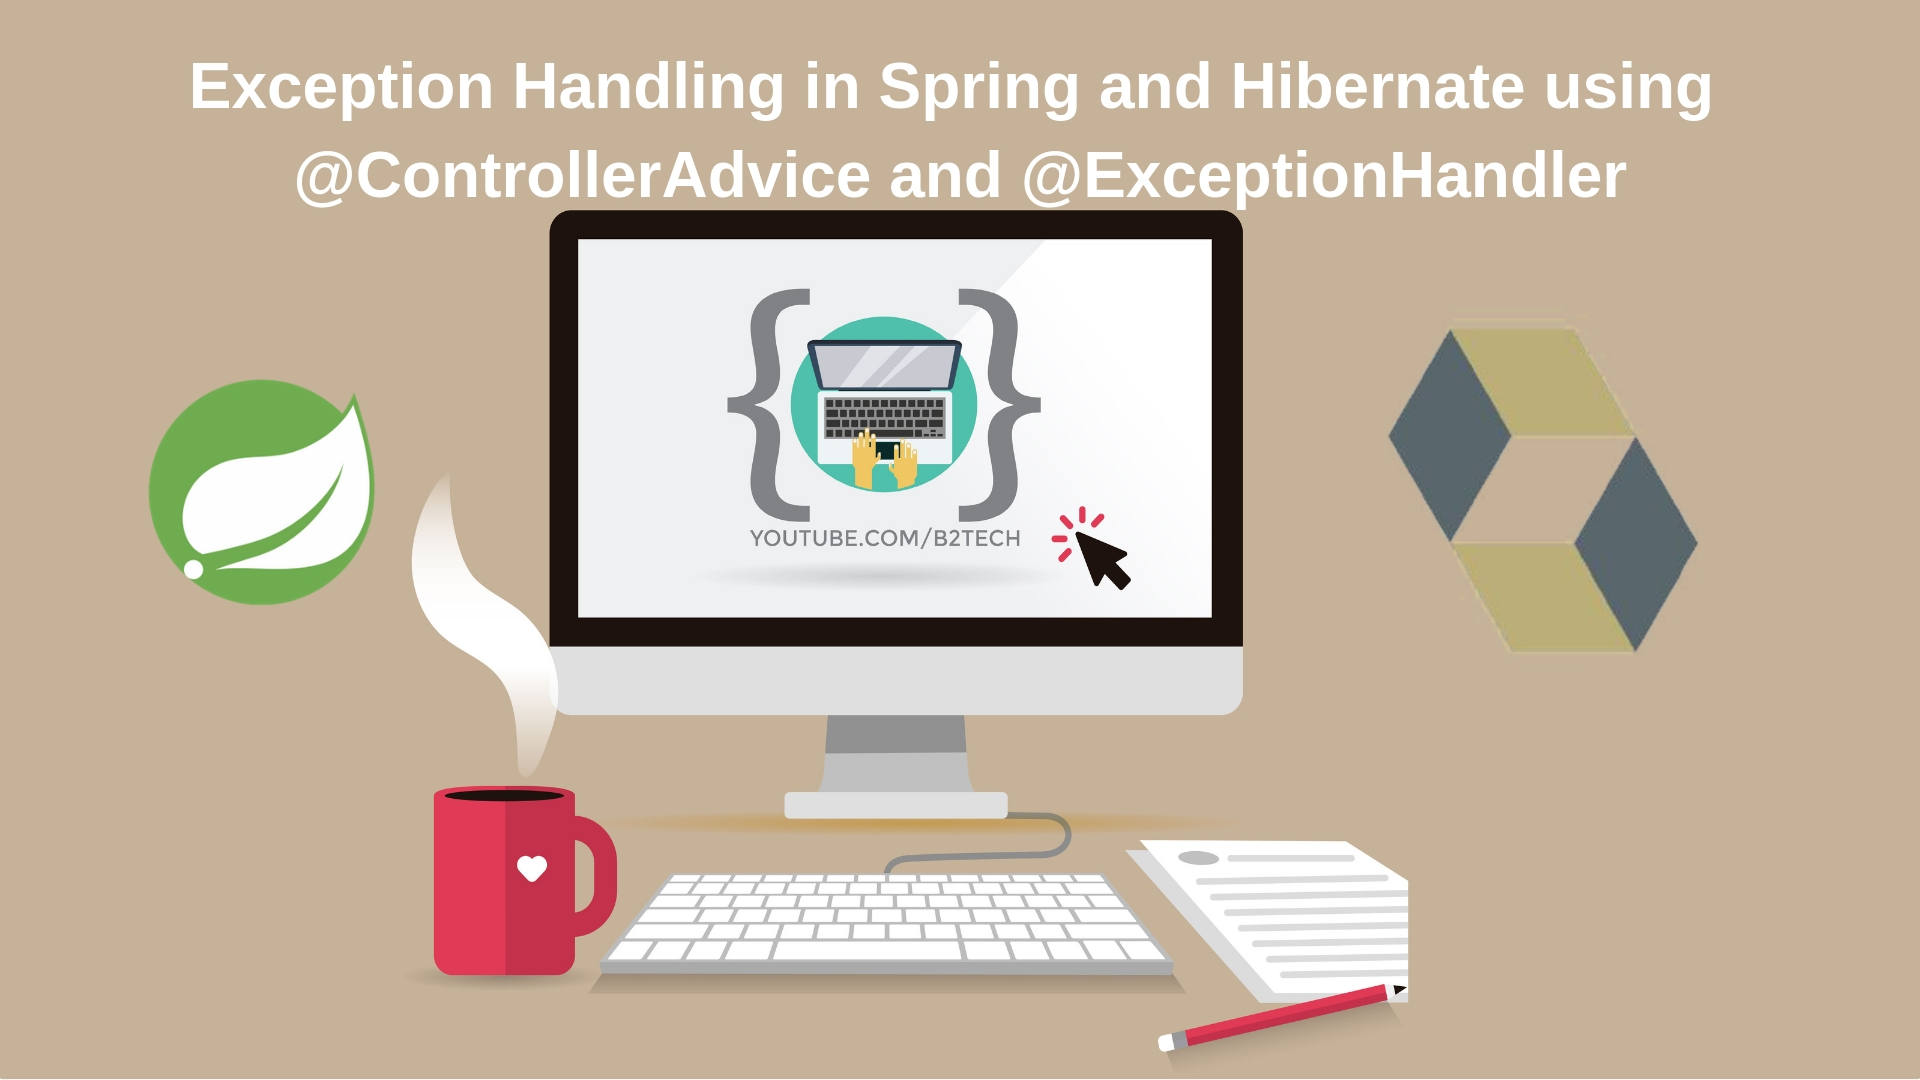 You are currently viewing Global Exceptional Handling in Spring and Hibernate using @ControllerAdvice and @ExceptionHandler